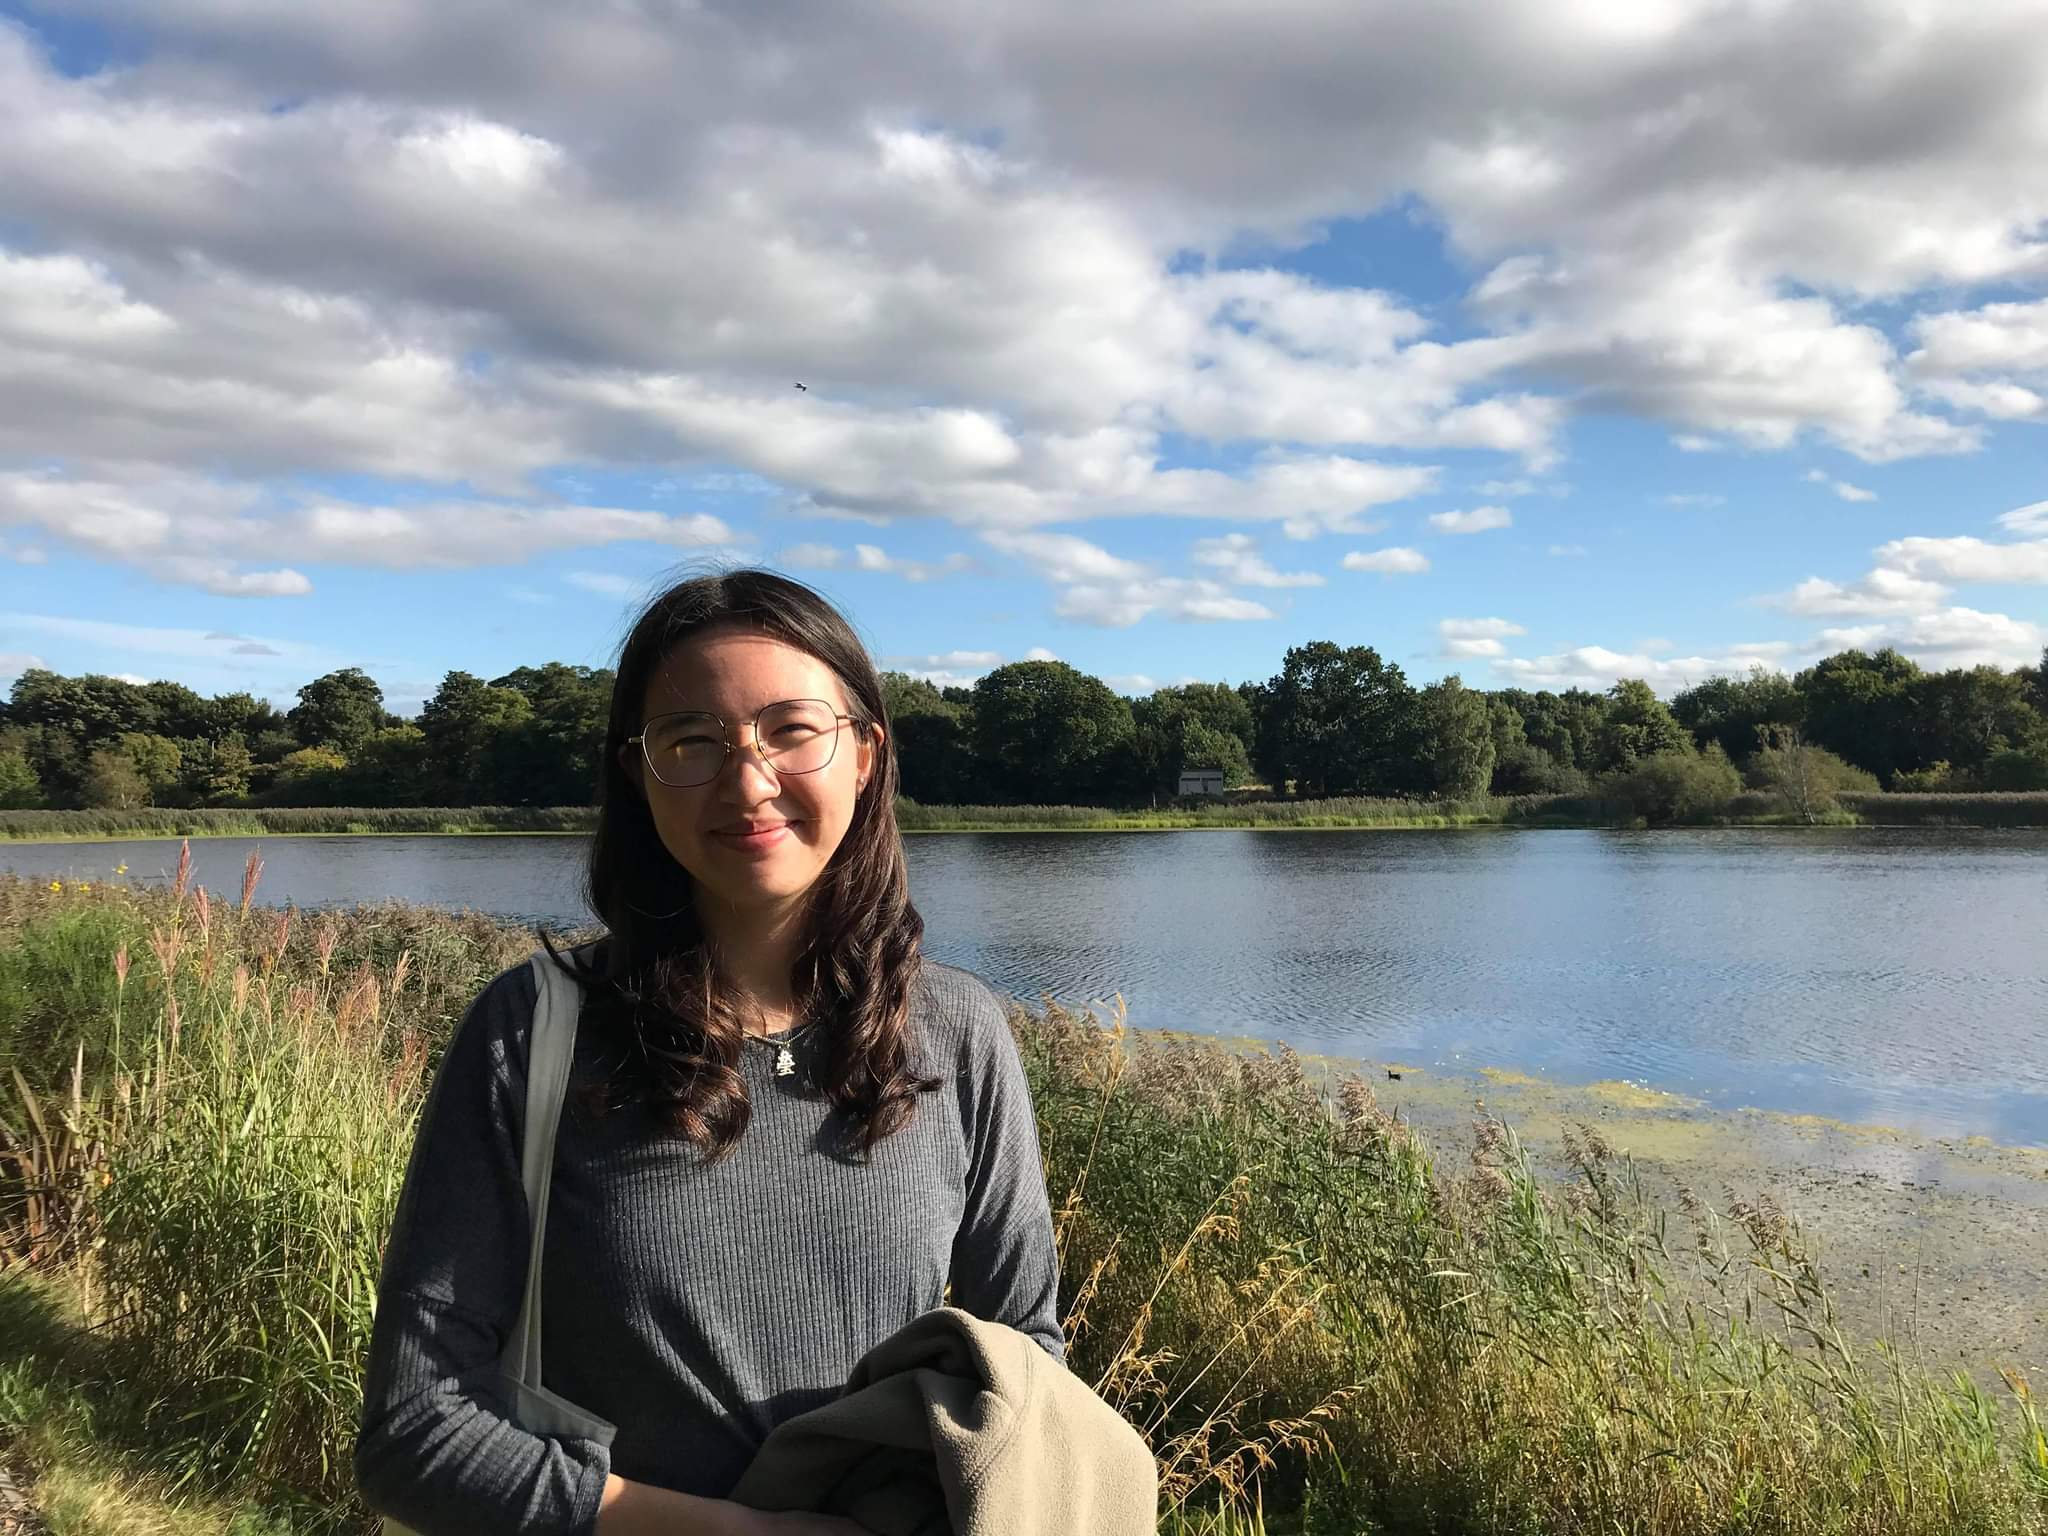 Photo of Vanessa smiling with a lake in the background